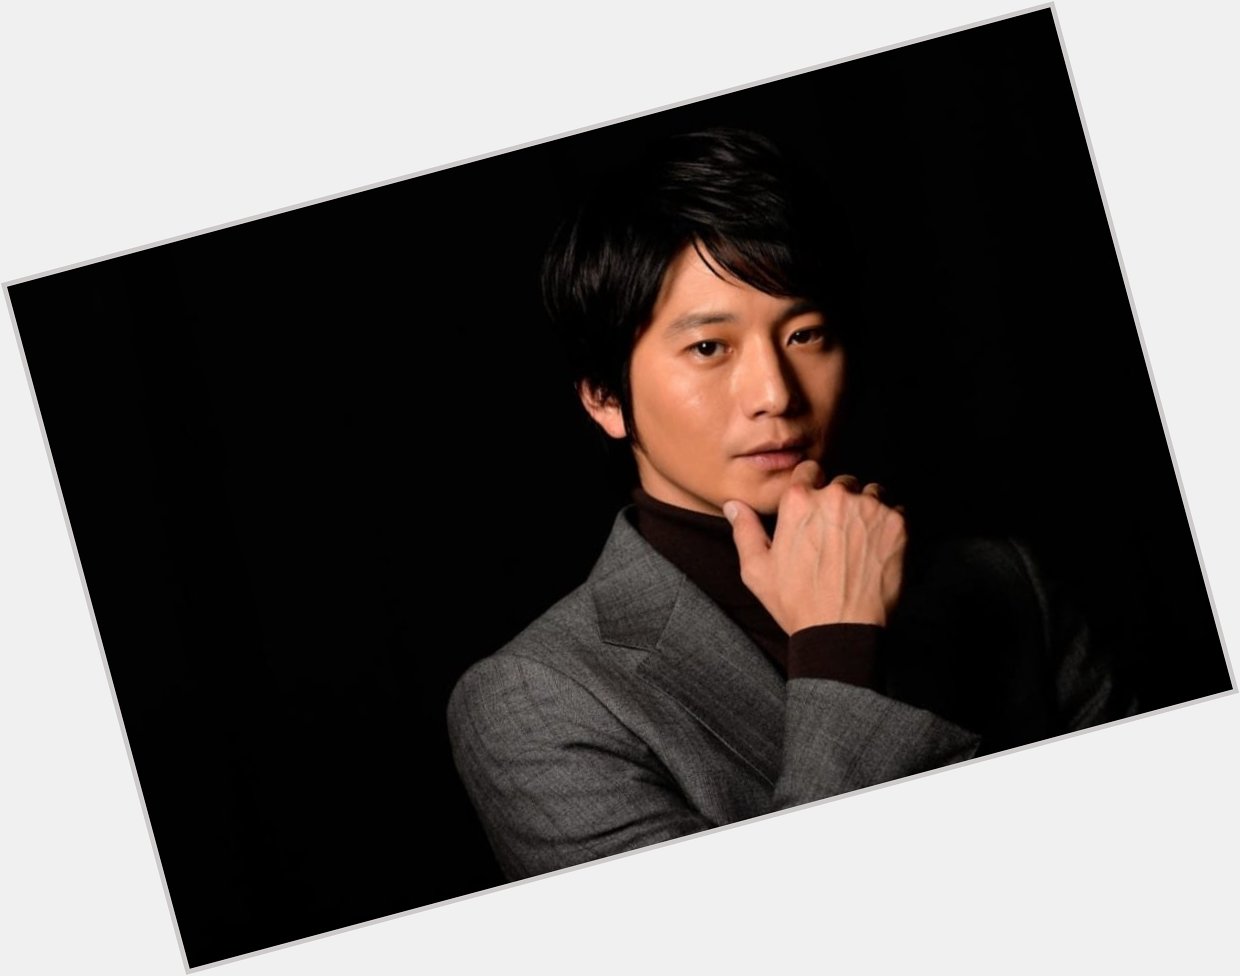 Happy Birthday, Osamu Mukai  (February 7, 1982)

When the first time you saw him? 